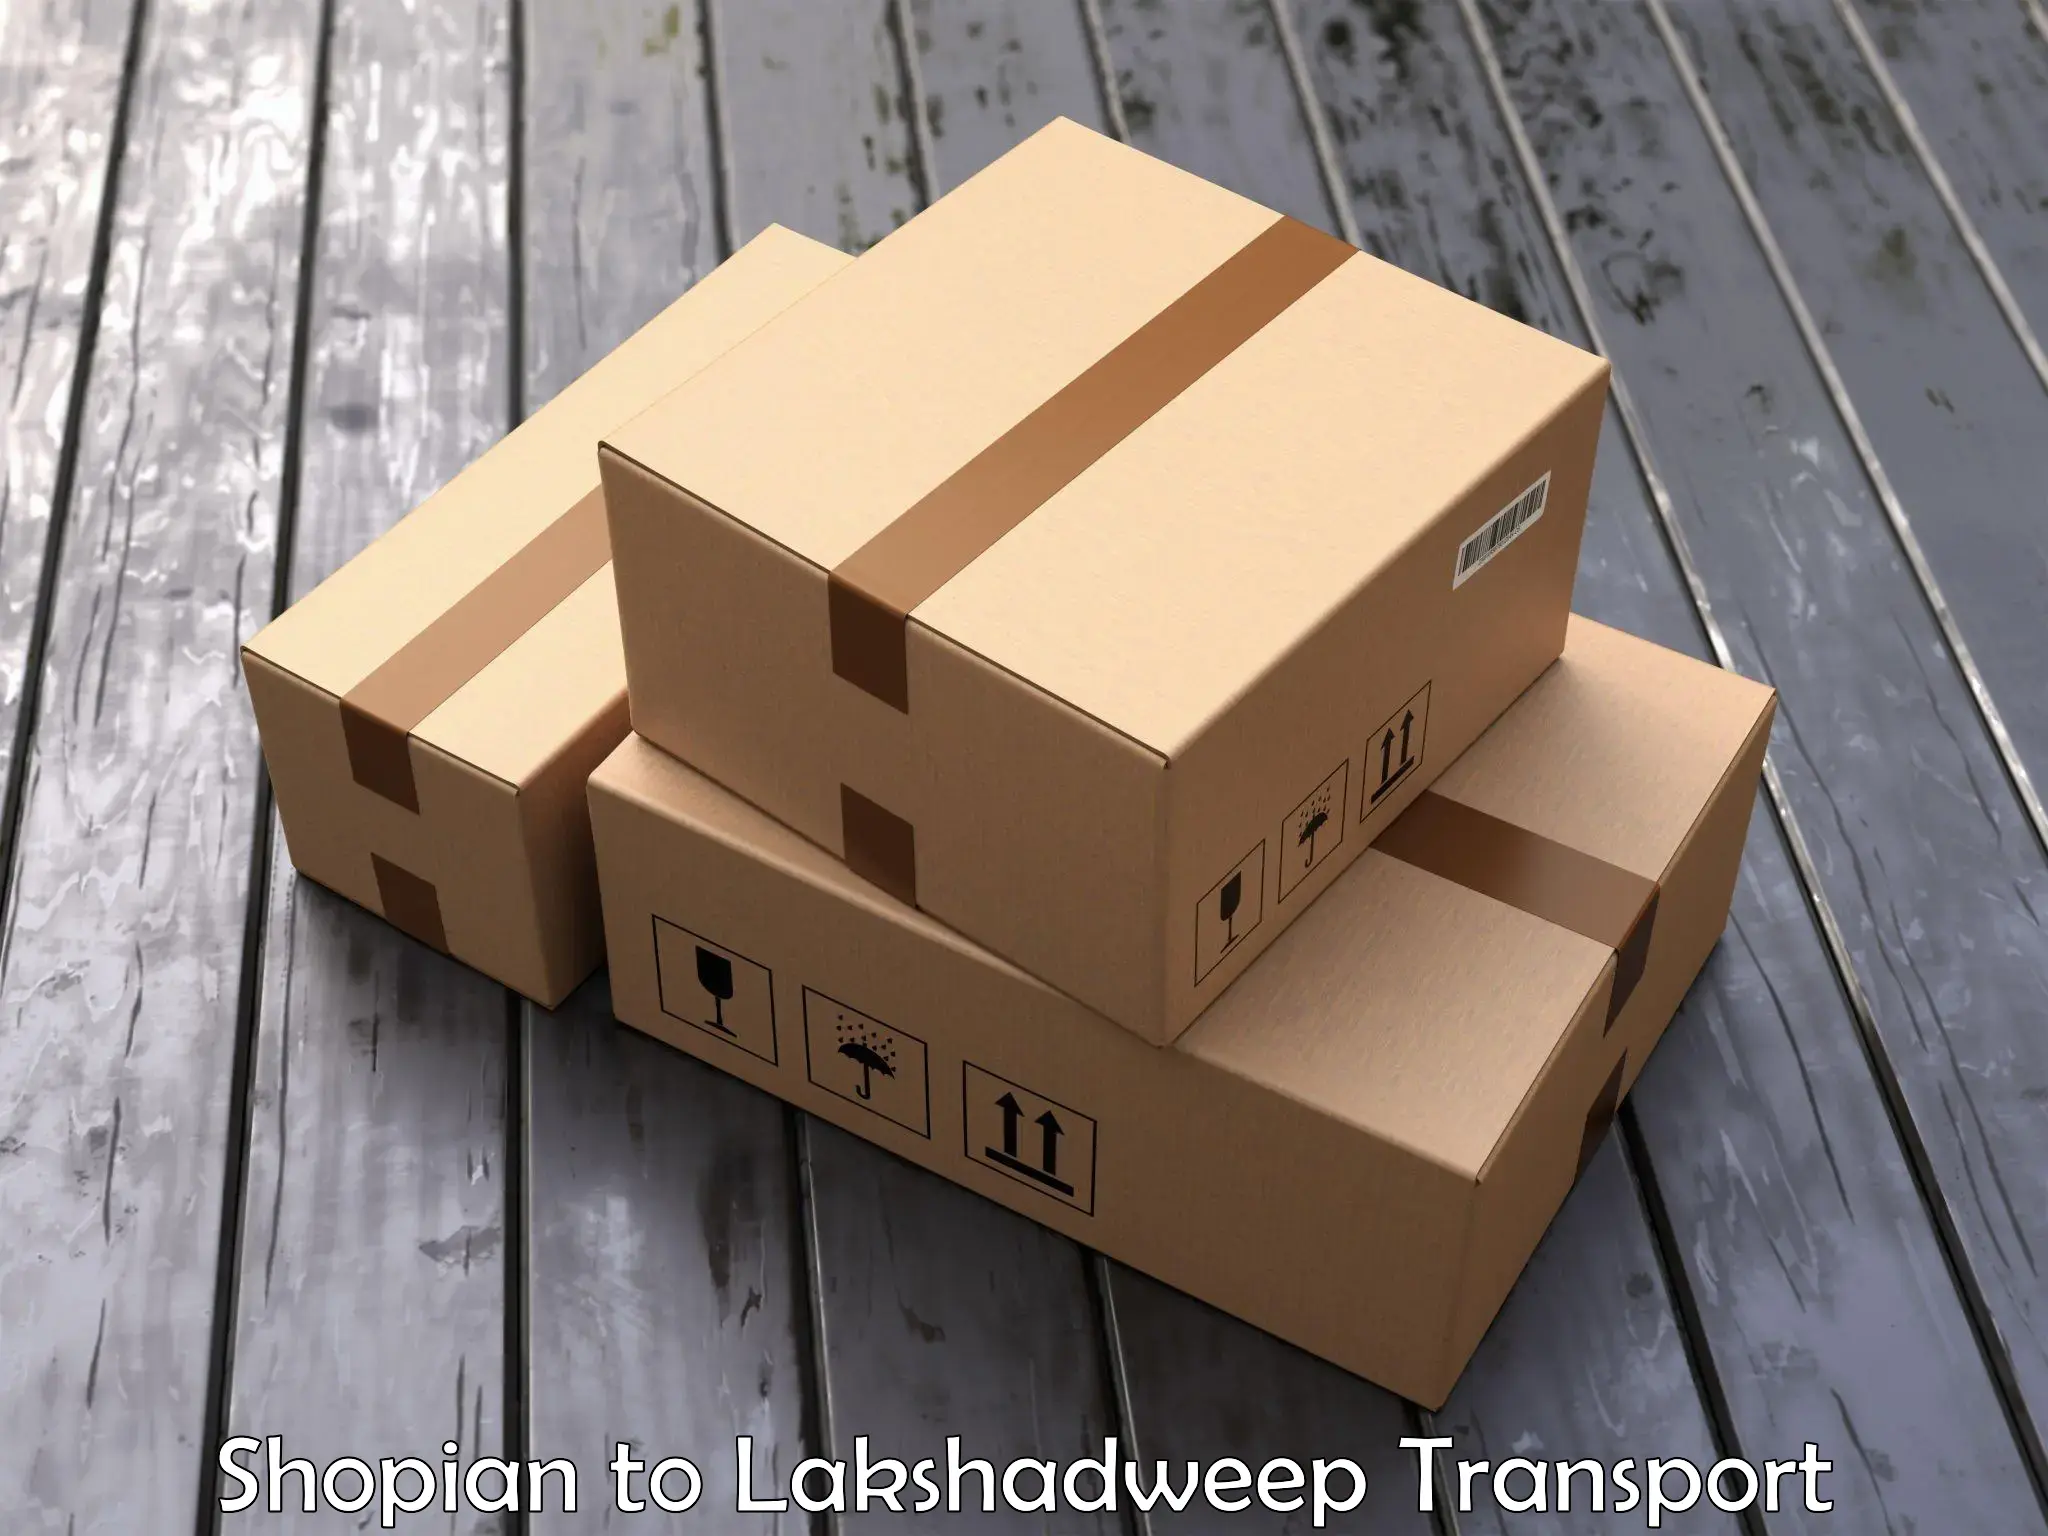 Commercial transport service Shopian to Lakshadweep